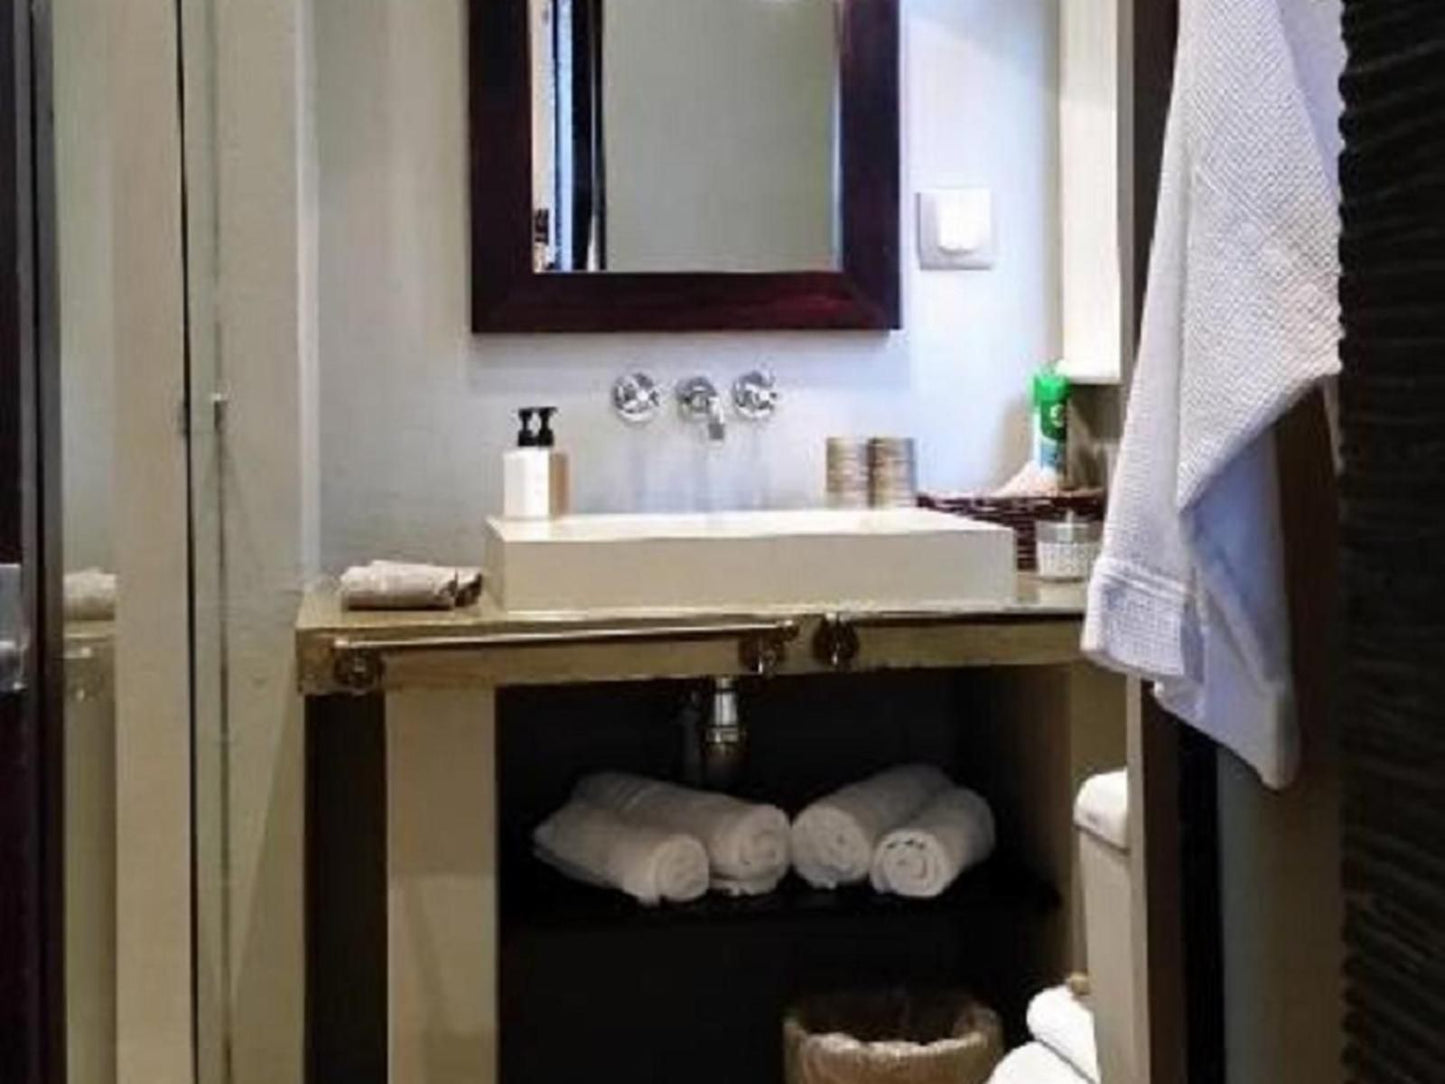 Jardin D Ebene Boutique Guest House Tamboerskloof Cape Town Western Cape South Africa Bathroom